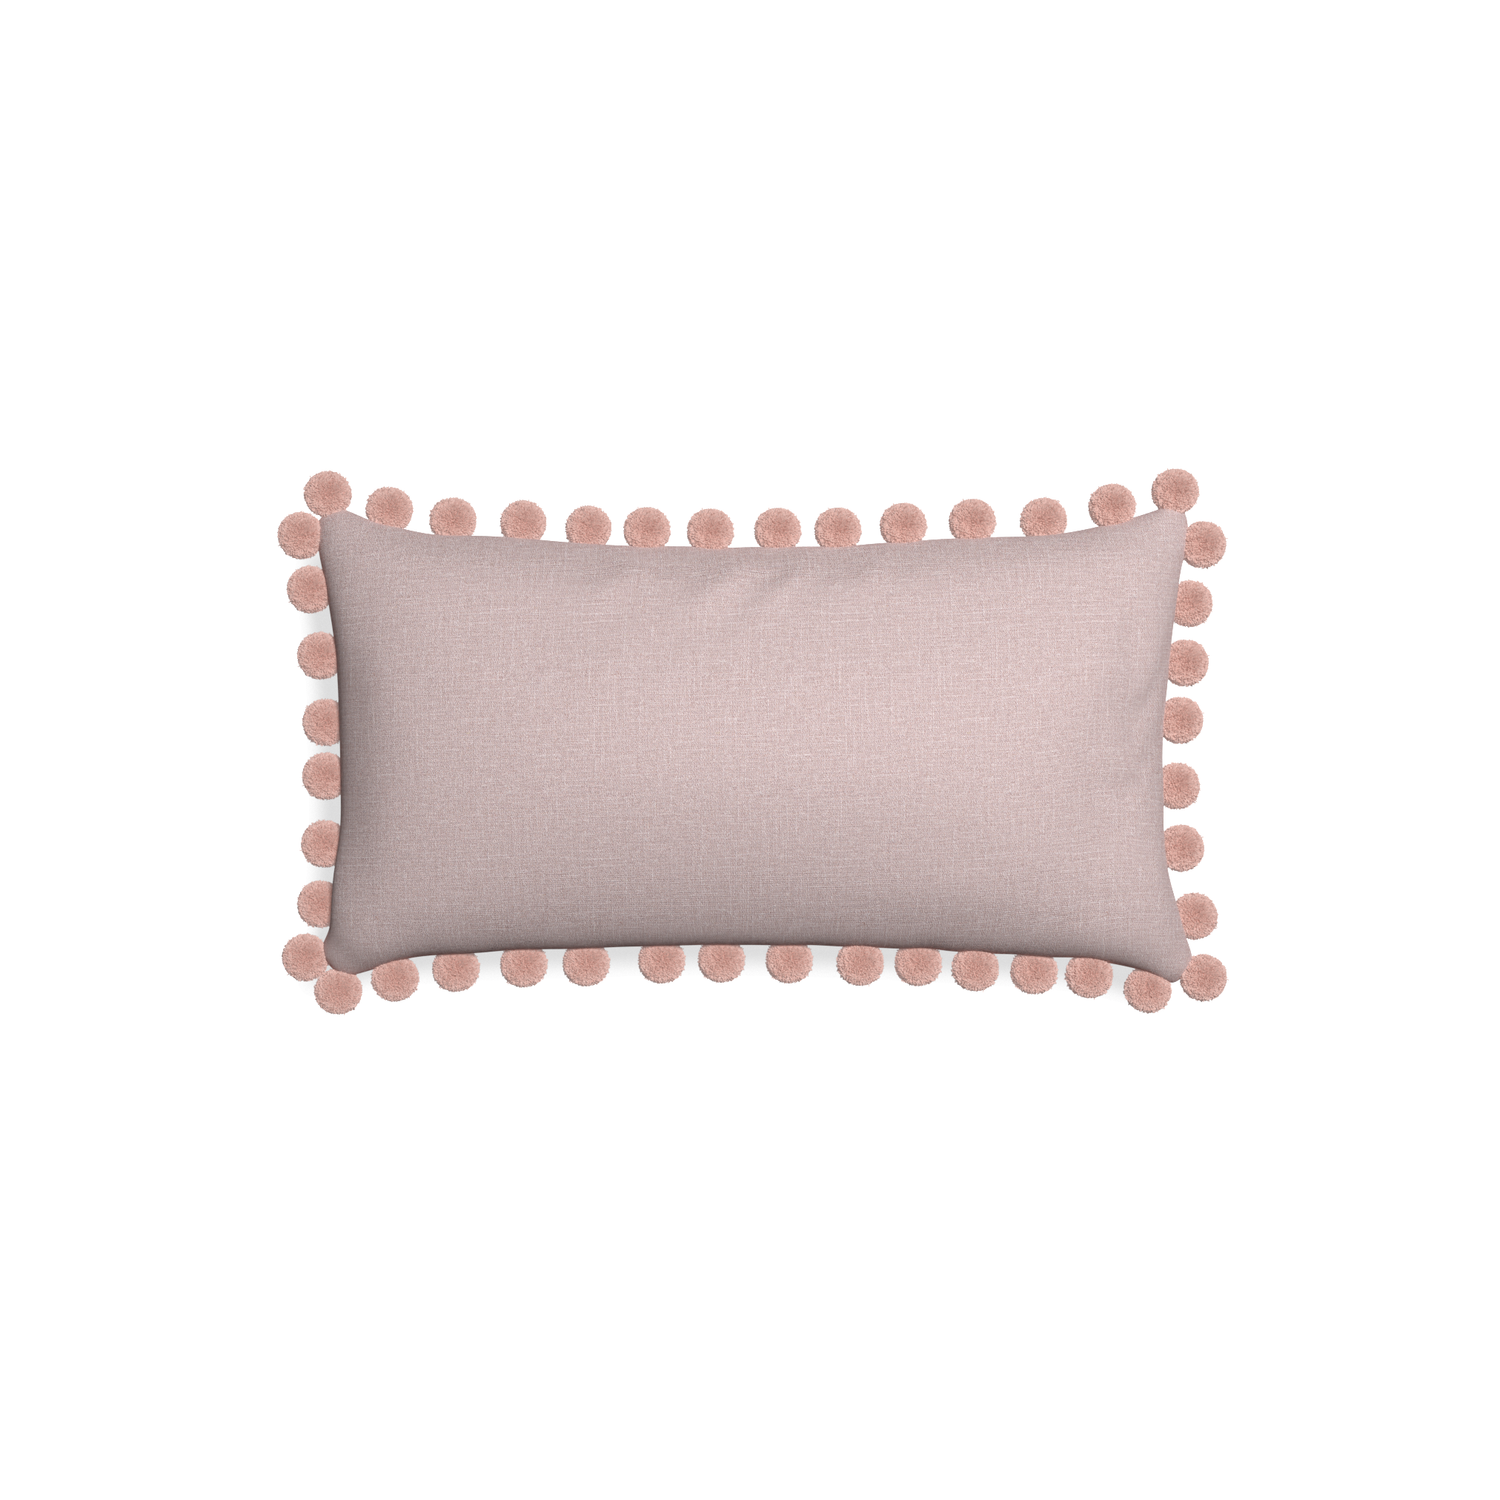 Petite-lumbar orchid custom mauve pinkpillow with rose pom pom on white background